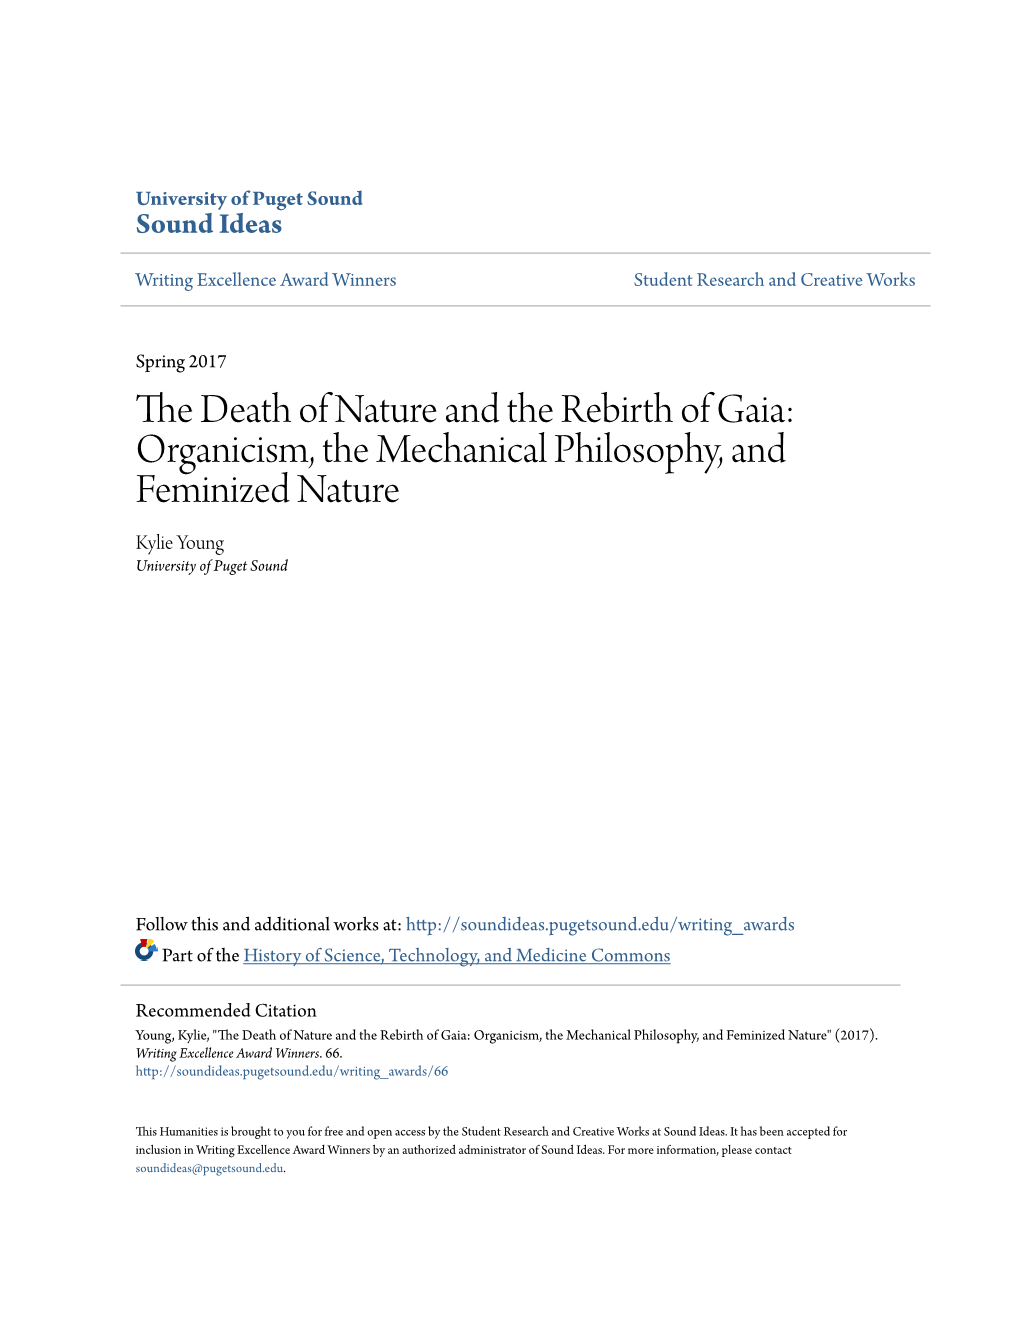 The Death of Nature and the Rebirth of Gaia: Organicism, the Mechanical Philosophy, and Feminized Nature